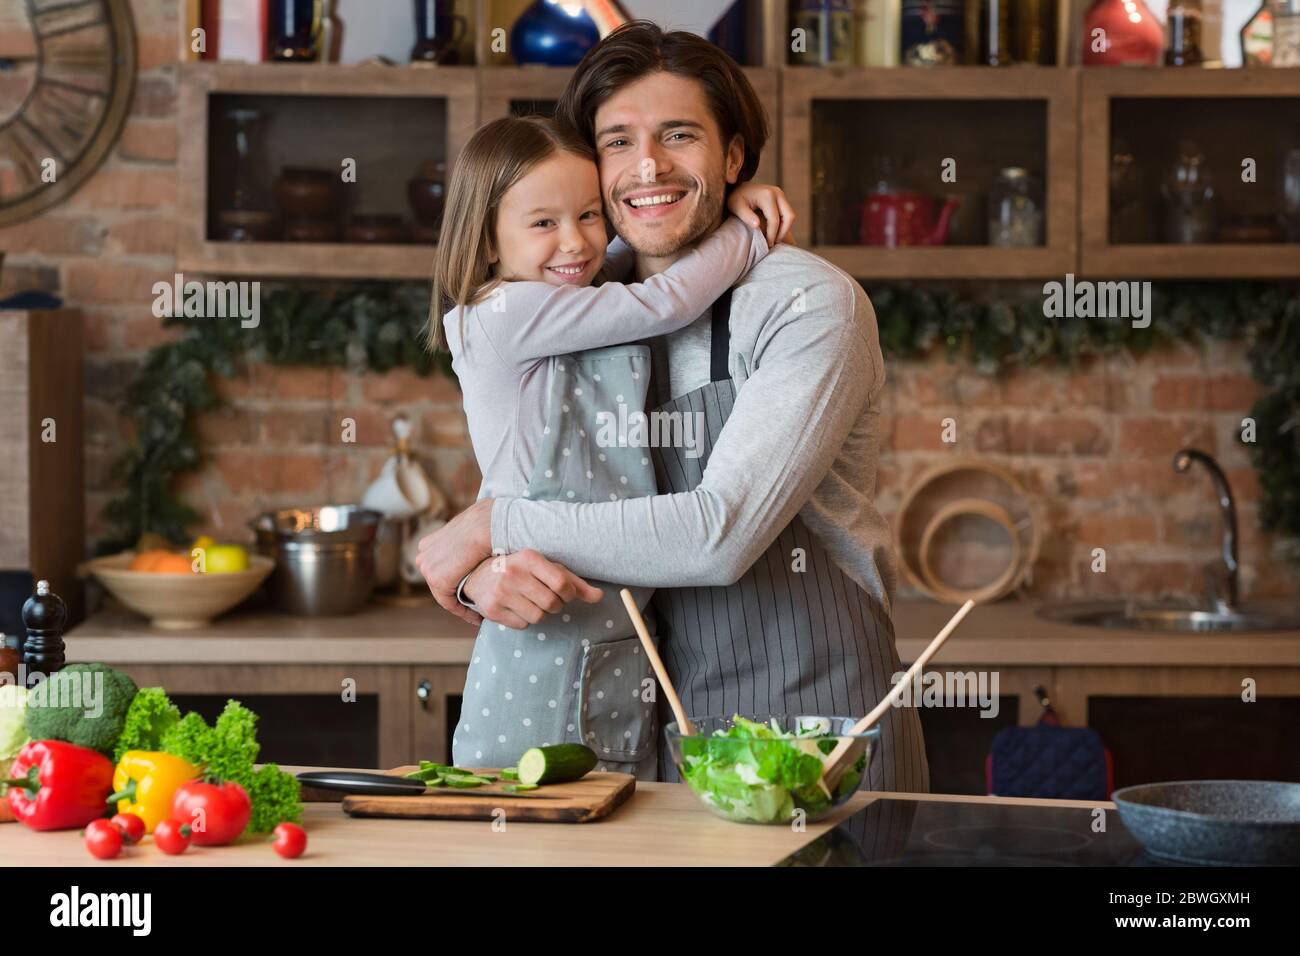 Family Love. Cheerful little girl hugging with her happy dad in kitchen Stock Photo